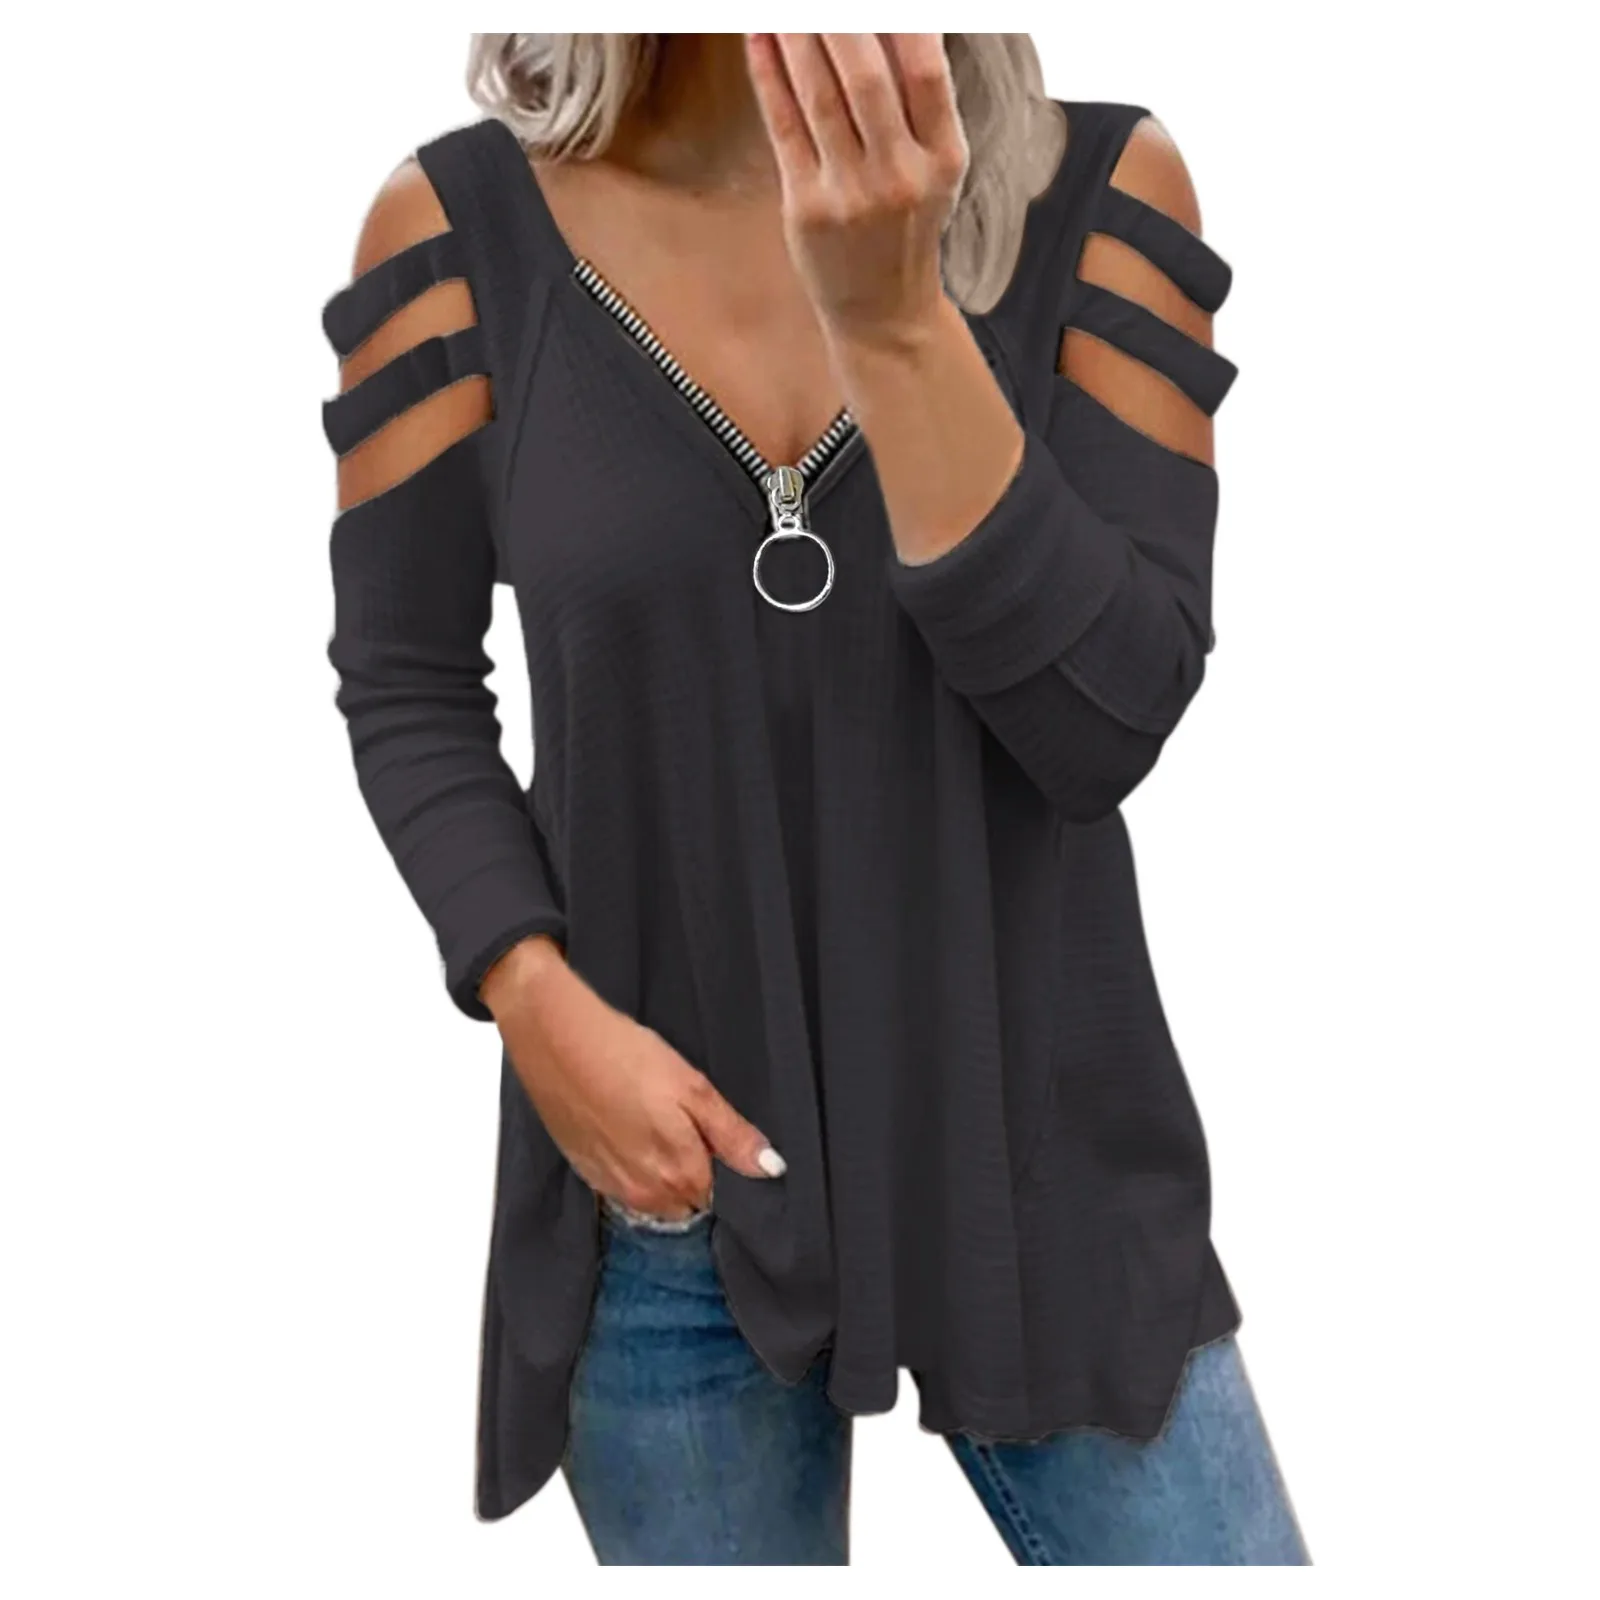 

Womens Sexy V-neck Collar Zipper Color Long Sleeve Fold Casual Blouse Tops Camisas Top Mujer De Moda Блузки Женские Новинки